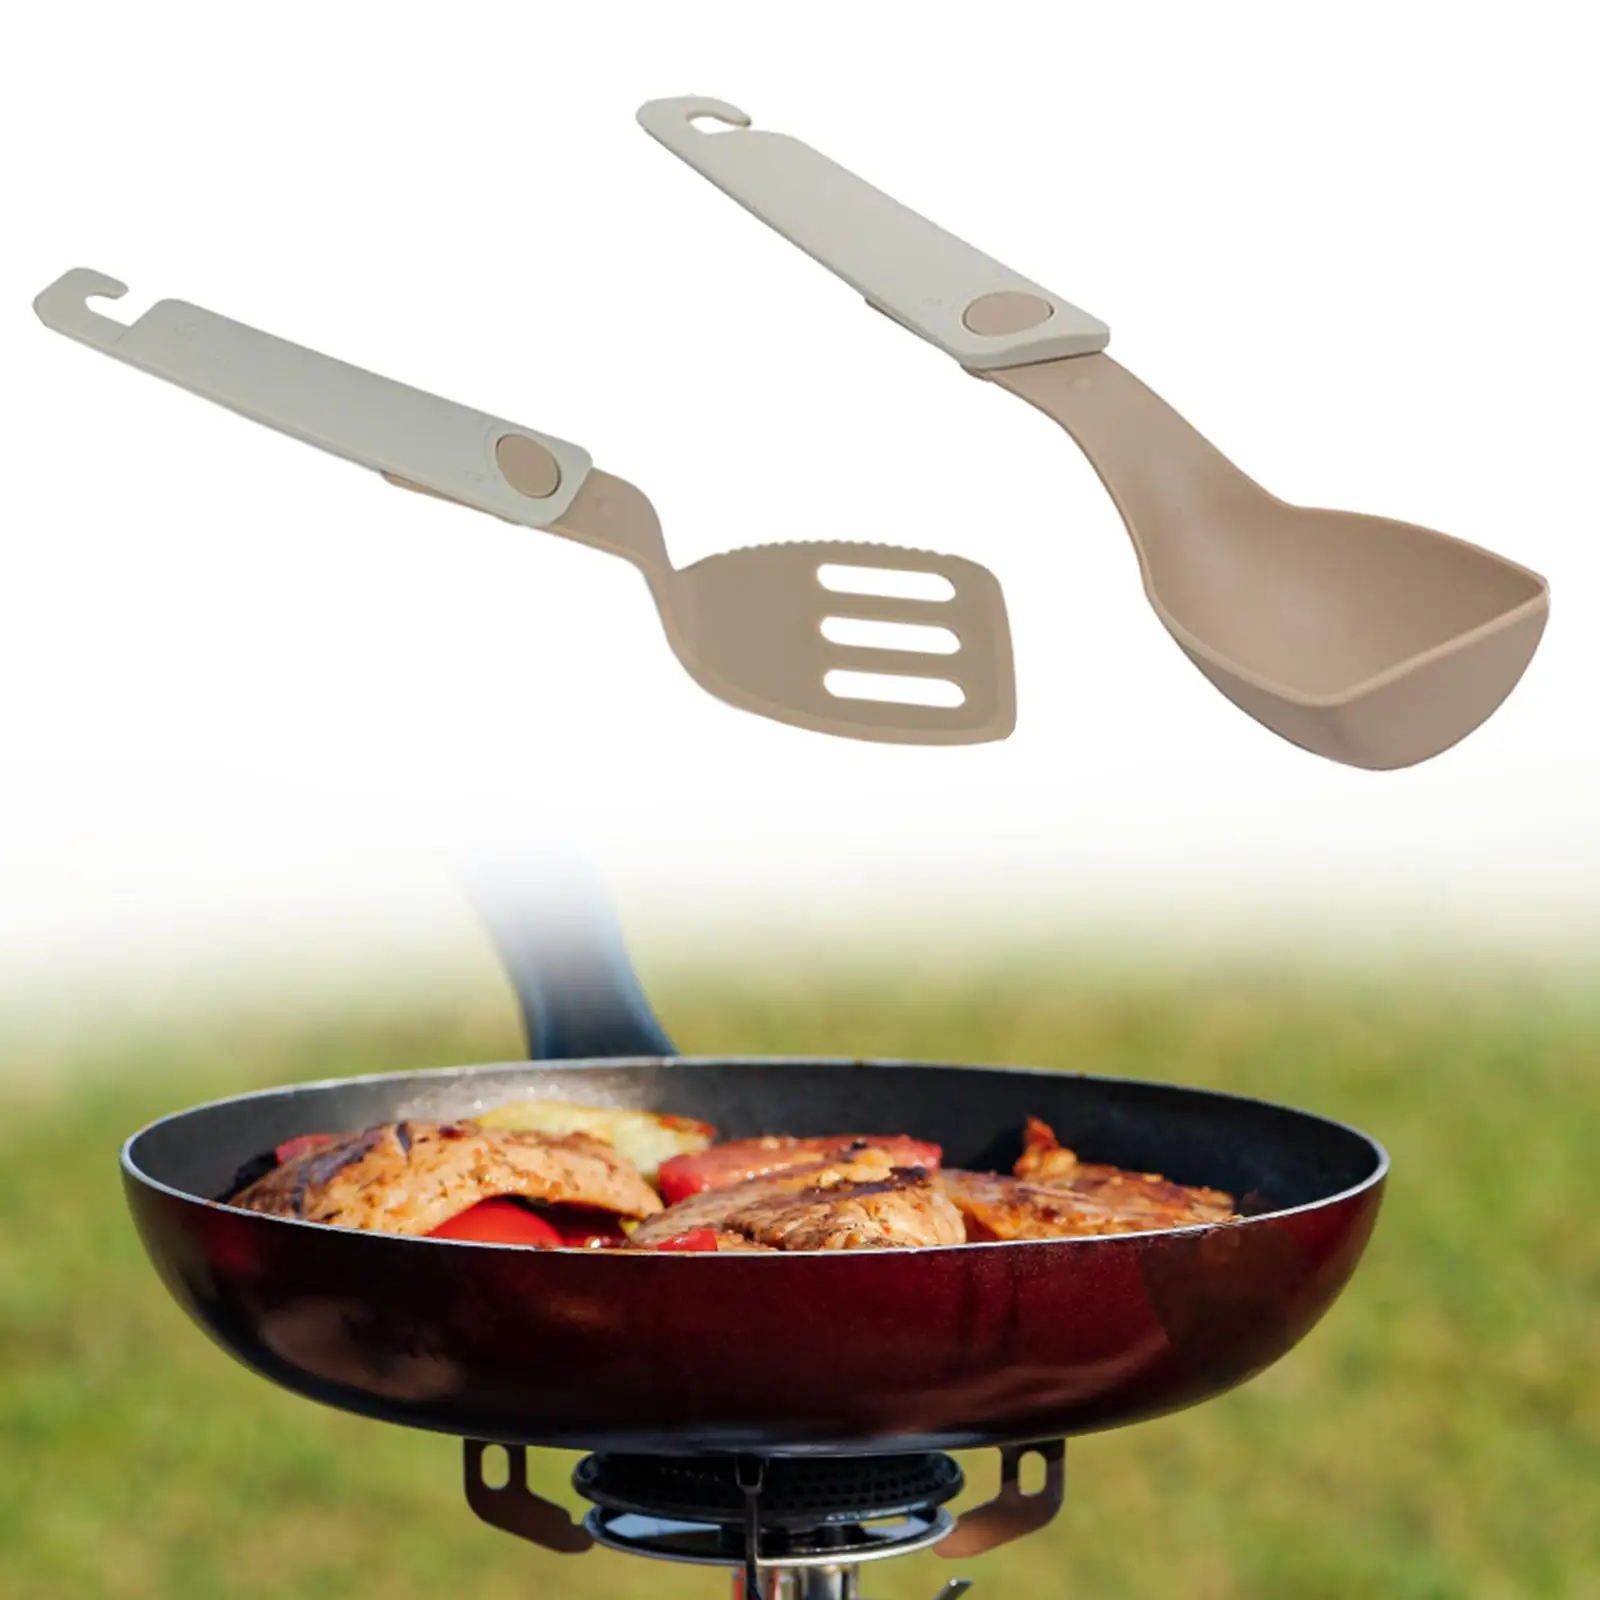 Outdoor Tableware Foldable Portable Cooking Utensil Camping Cutlery Cookware Flatware for Kitchen Hiking BBQ Picnic Travel